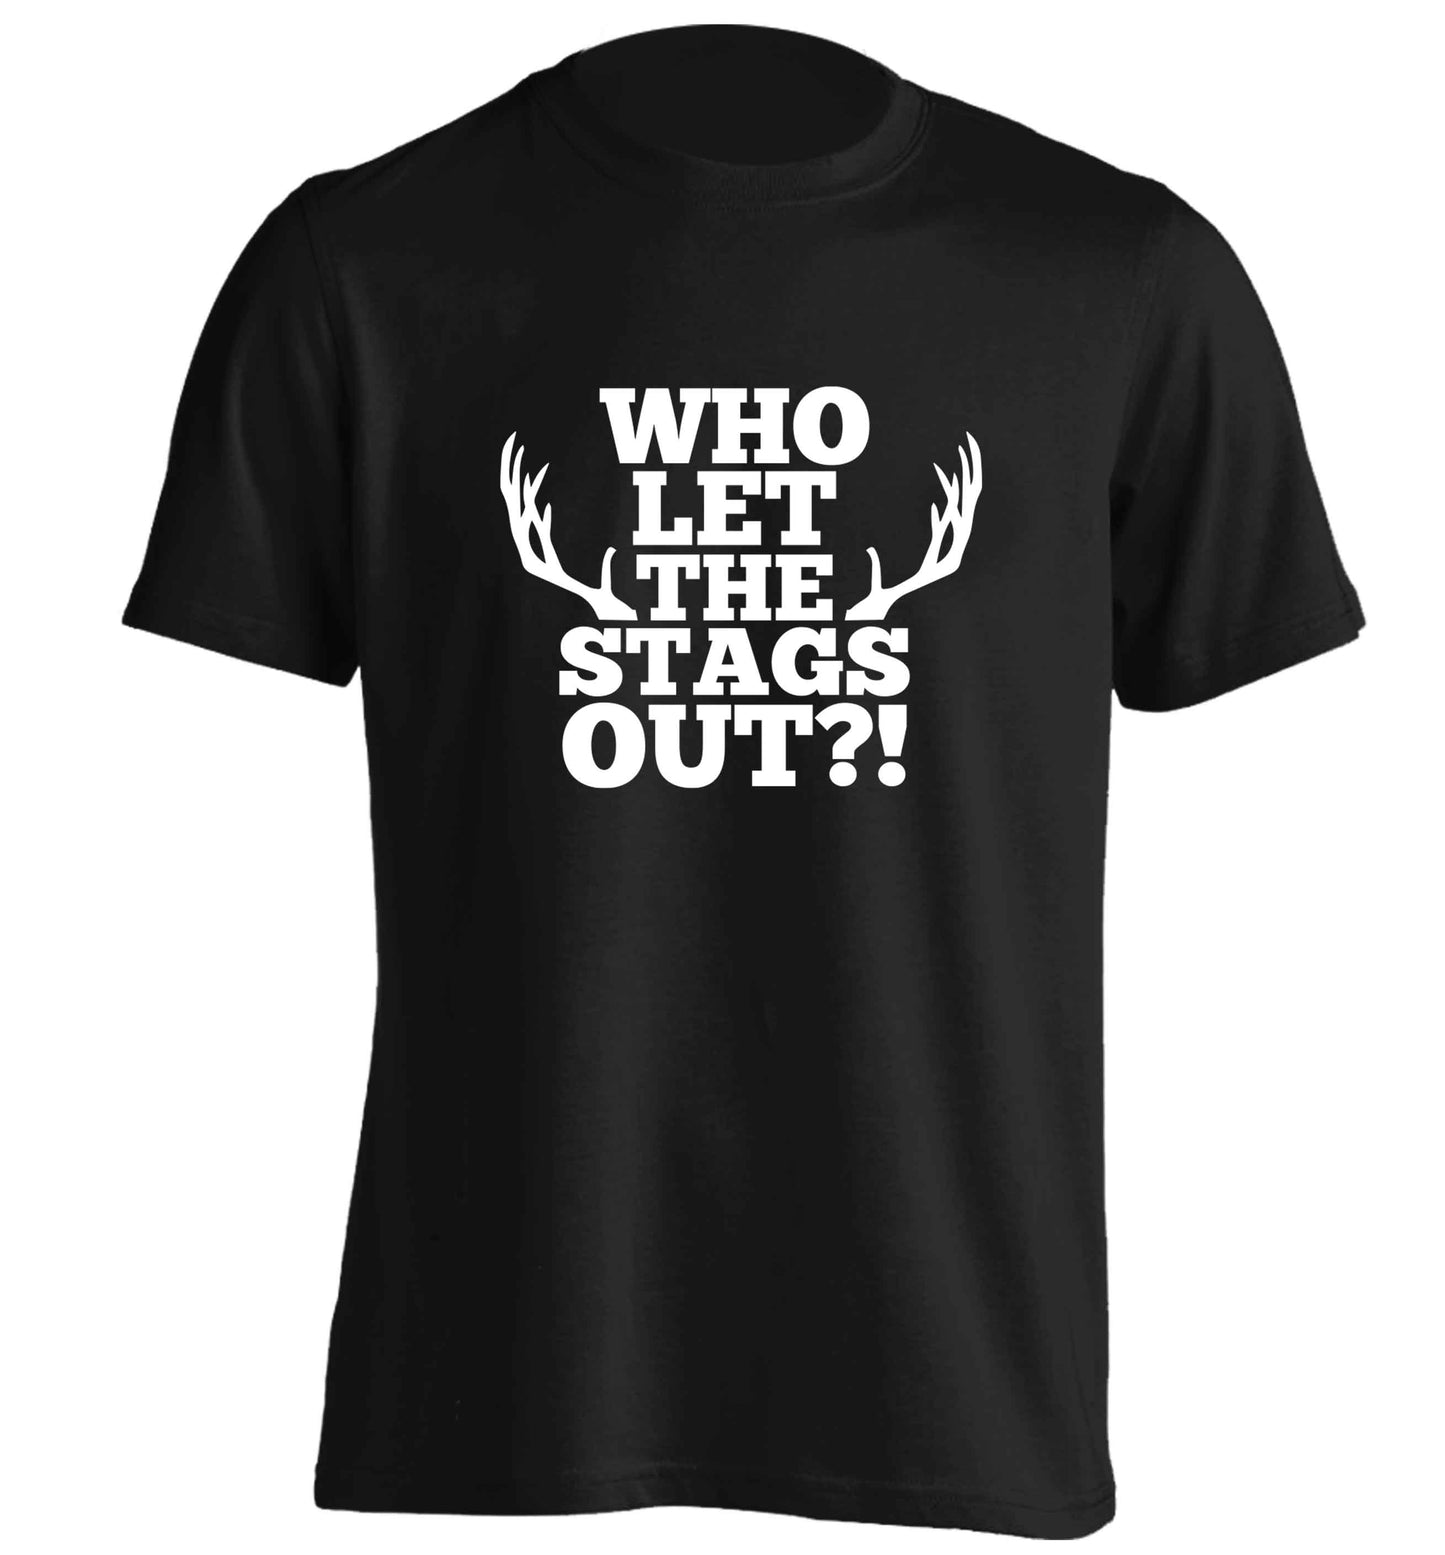 Who let the stags out adults unisex black Tshirt 2XL